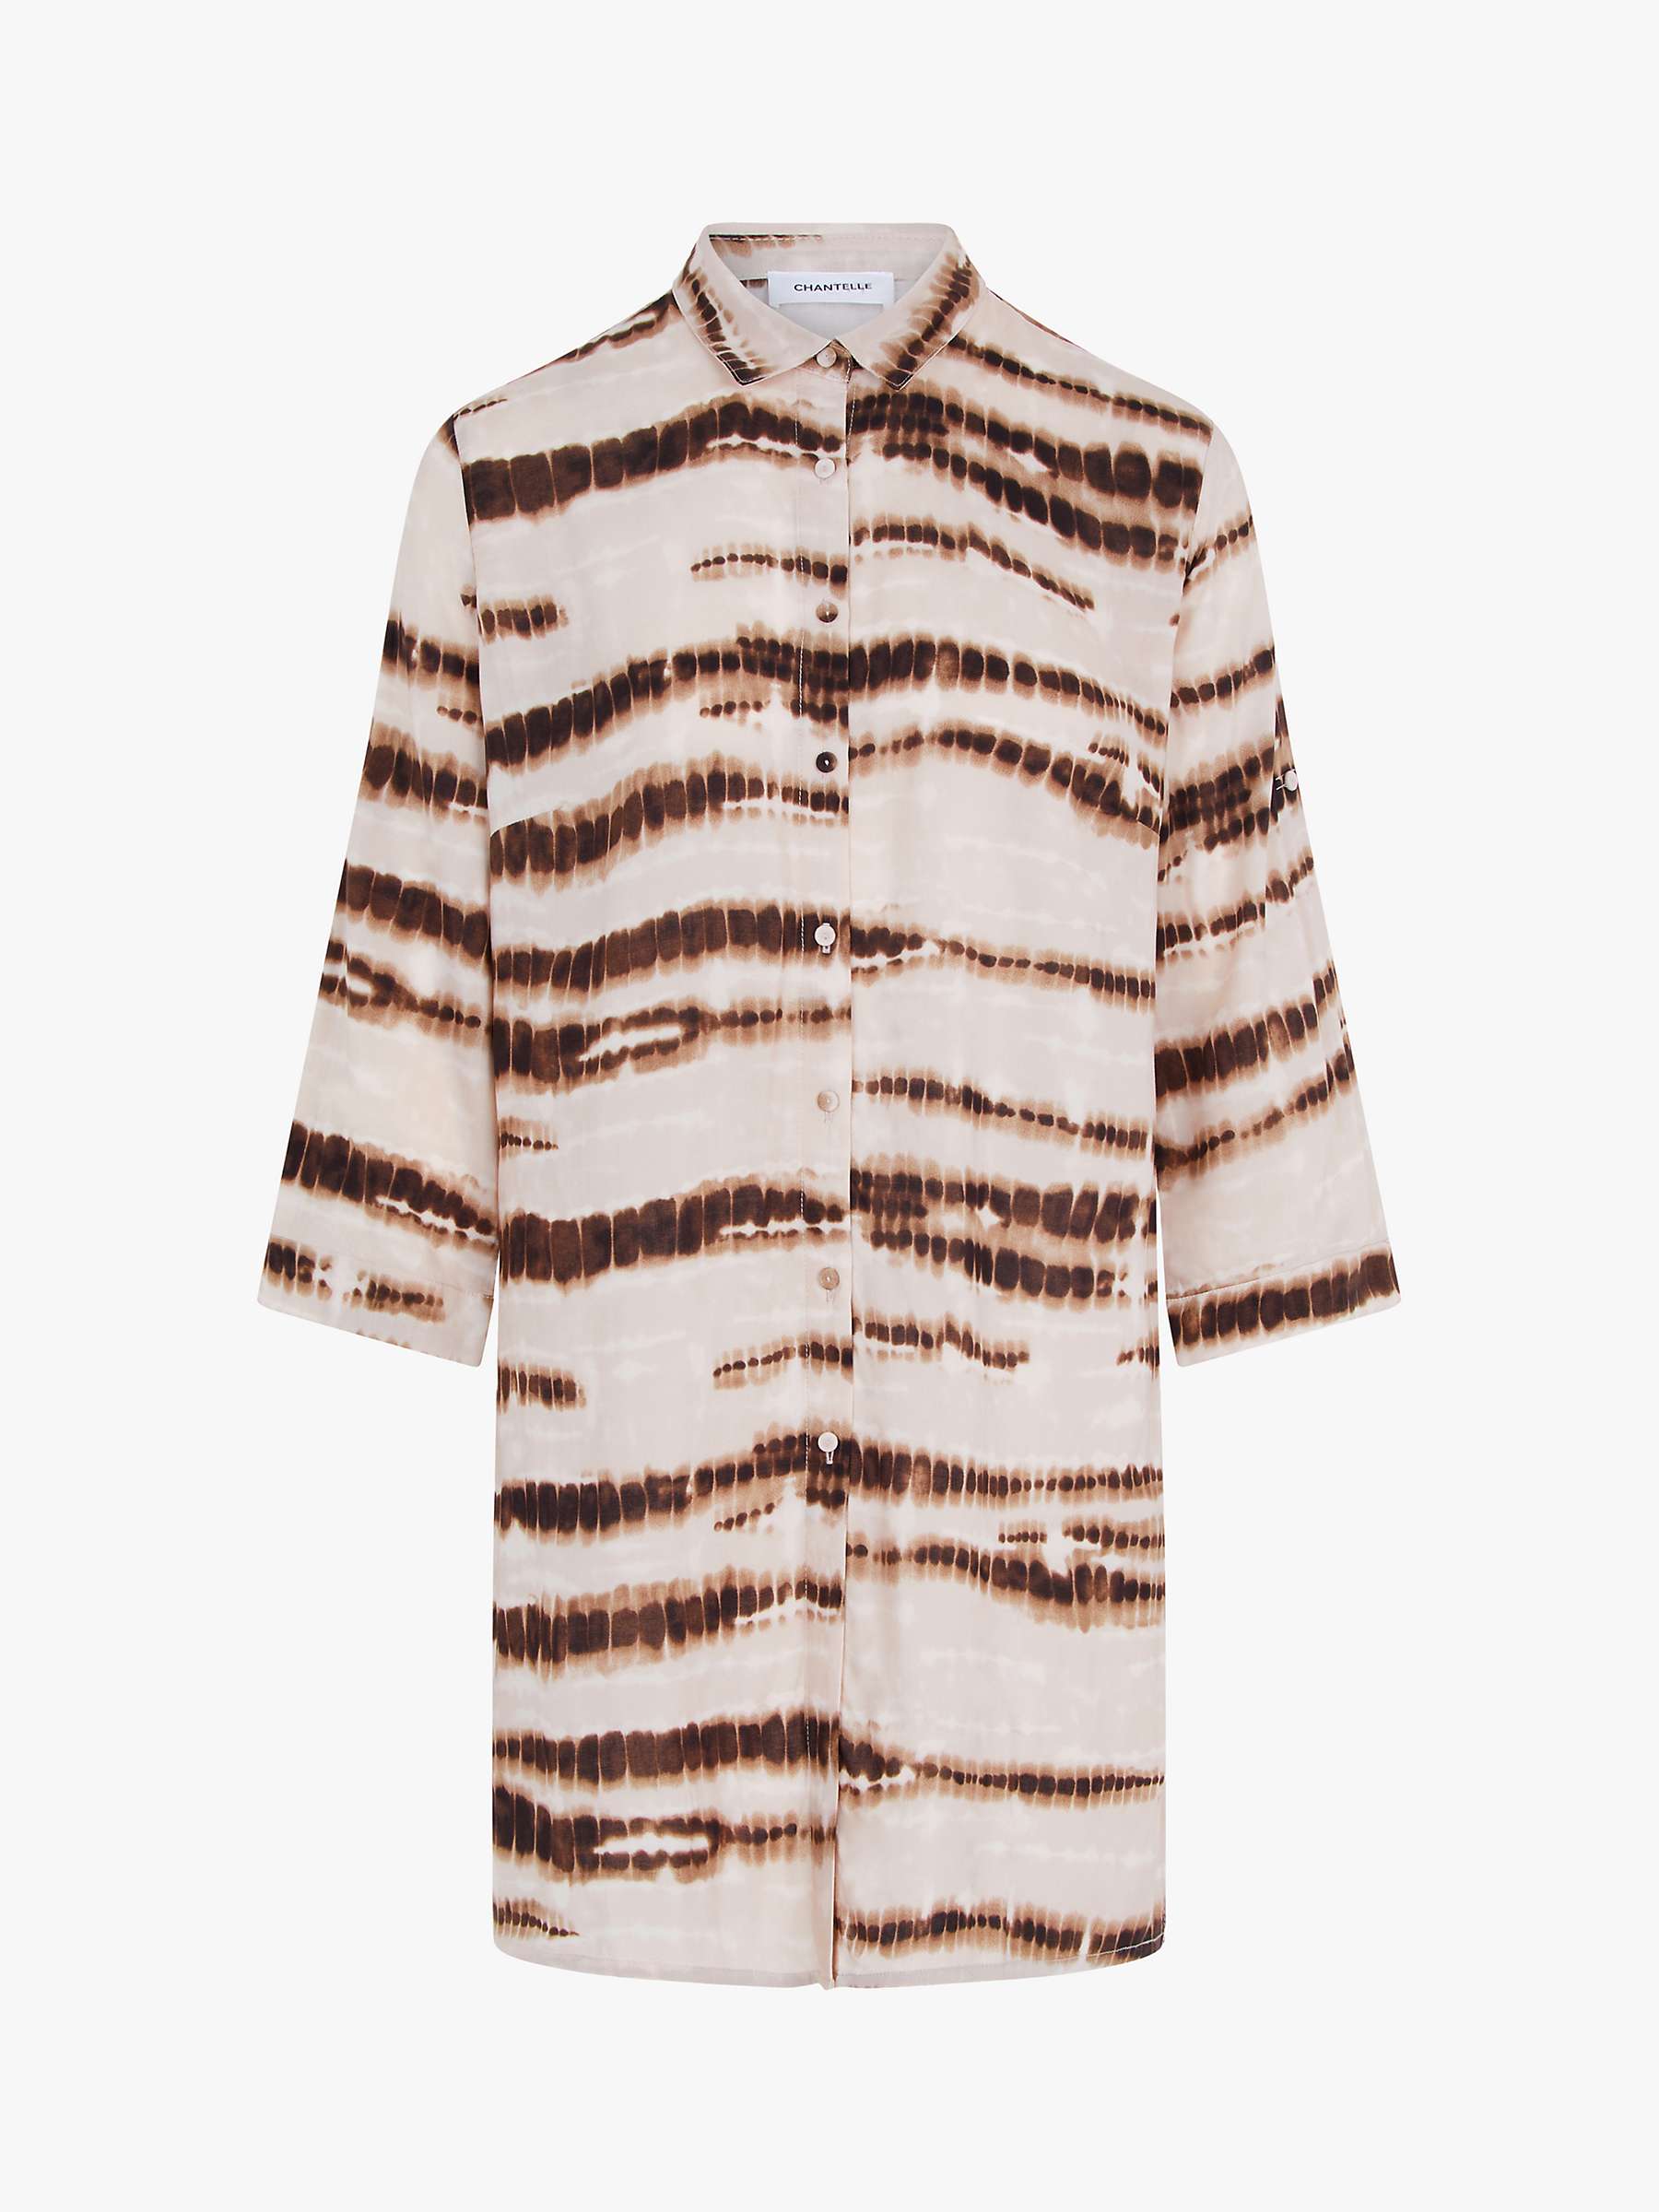 Buy Chantelle Python Print Shirt Cover Up, Brown/Multi Online at johnlewis.com